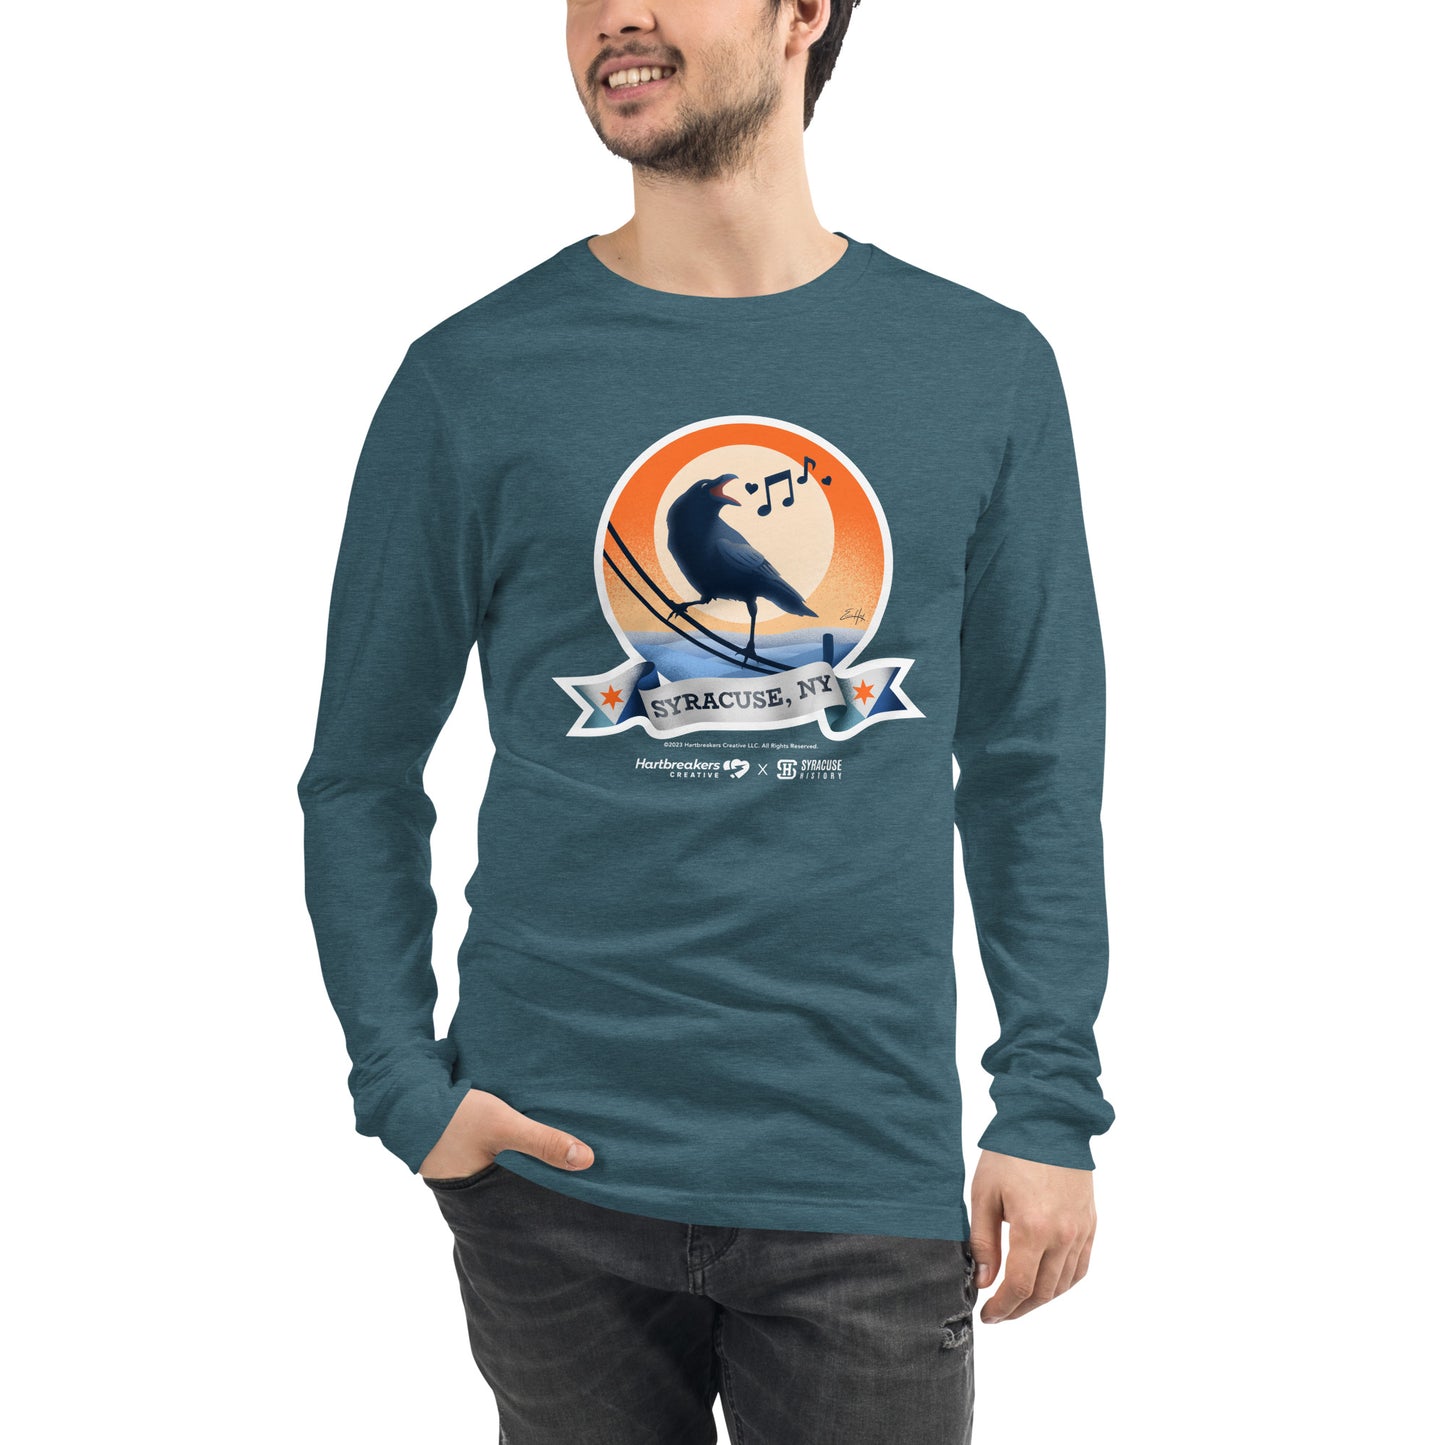 A man wearing a heather teal long sleeve T-shirt featuring an illustration of a crow on a telephone wire and a banner beneath it that says Syracuse, NY